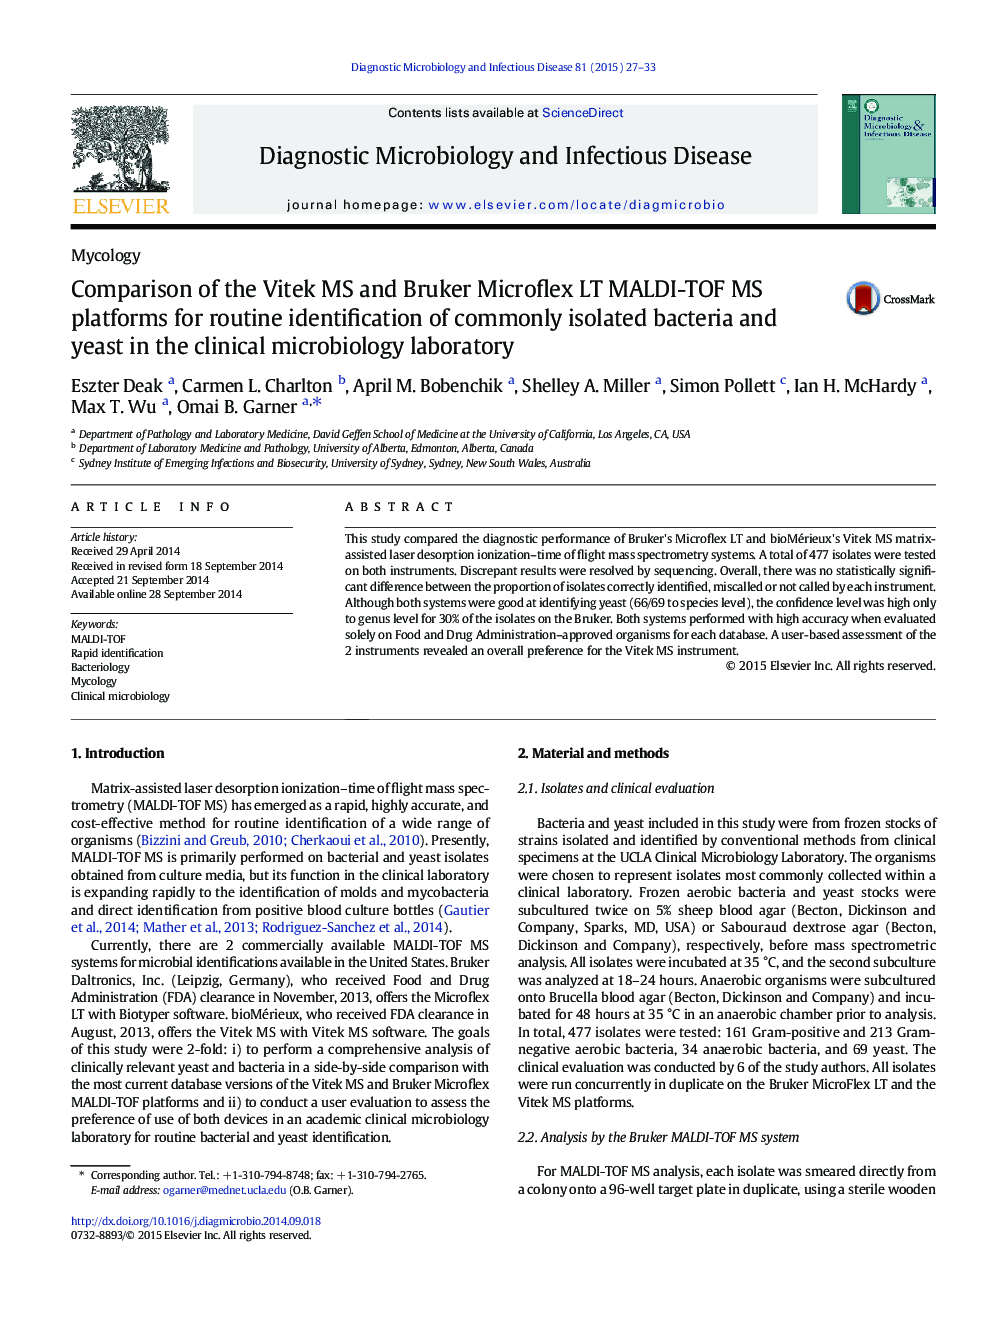 Comparison of the Vitek MS and Bruker Microflex LT MALDI-TOF MS platforms for routine identification of commonly isolated bacteria and yeast in the clinical microbiology laboratory